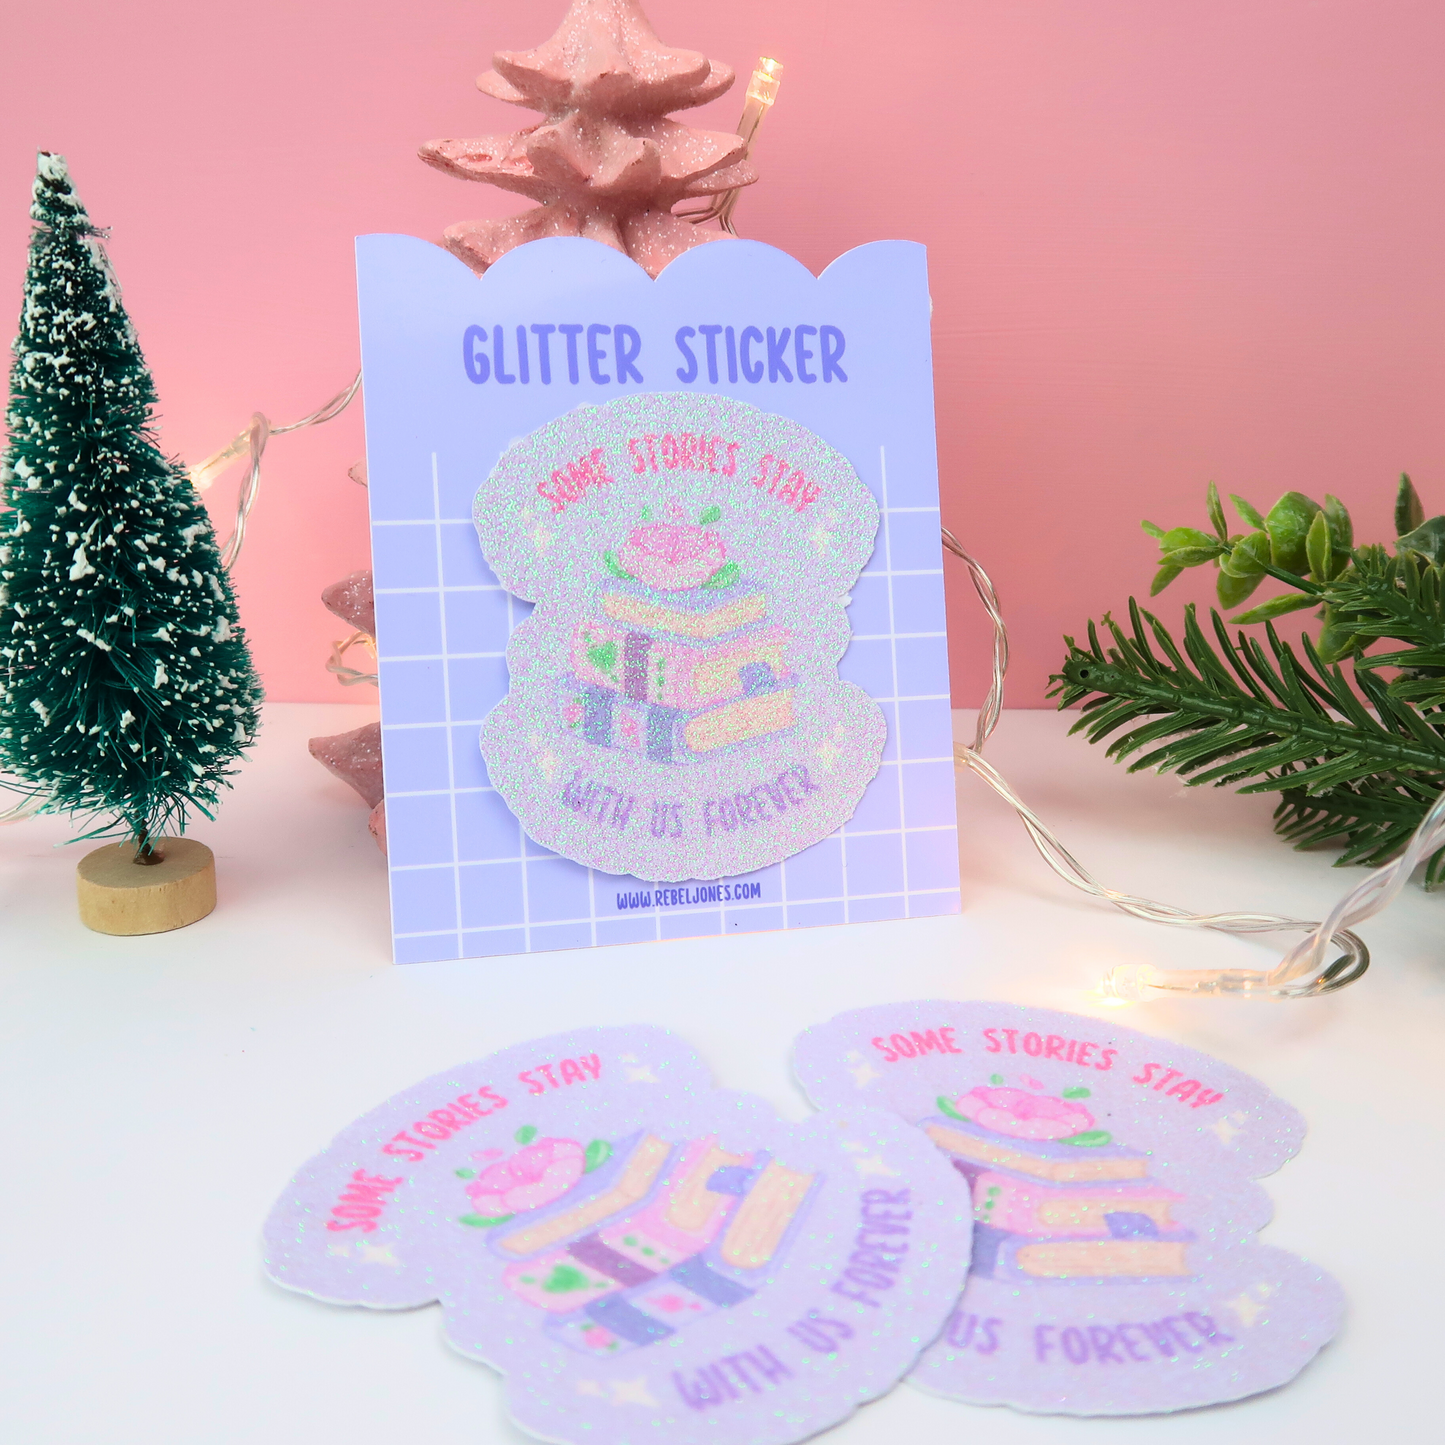 Some Stories Stay With us Forever - Glitter Sticker